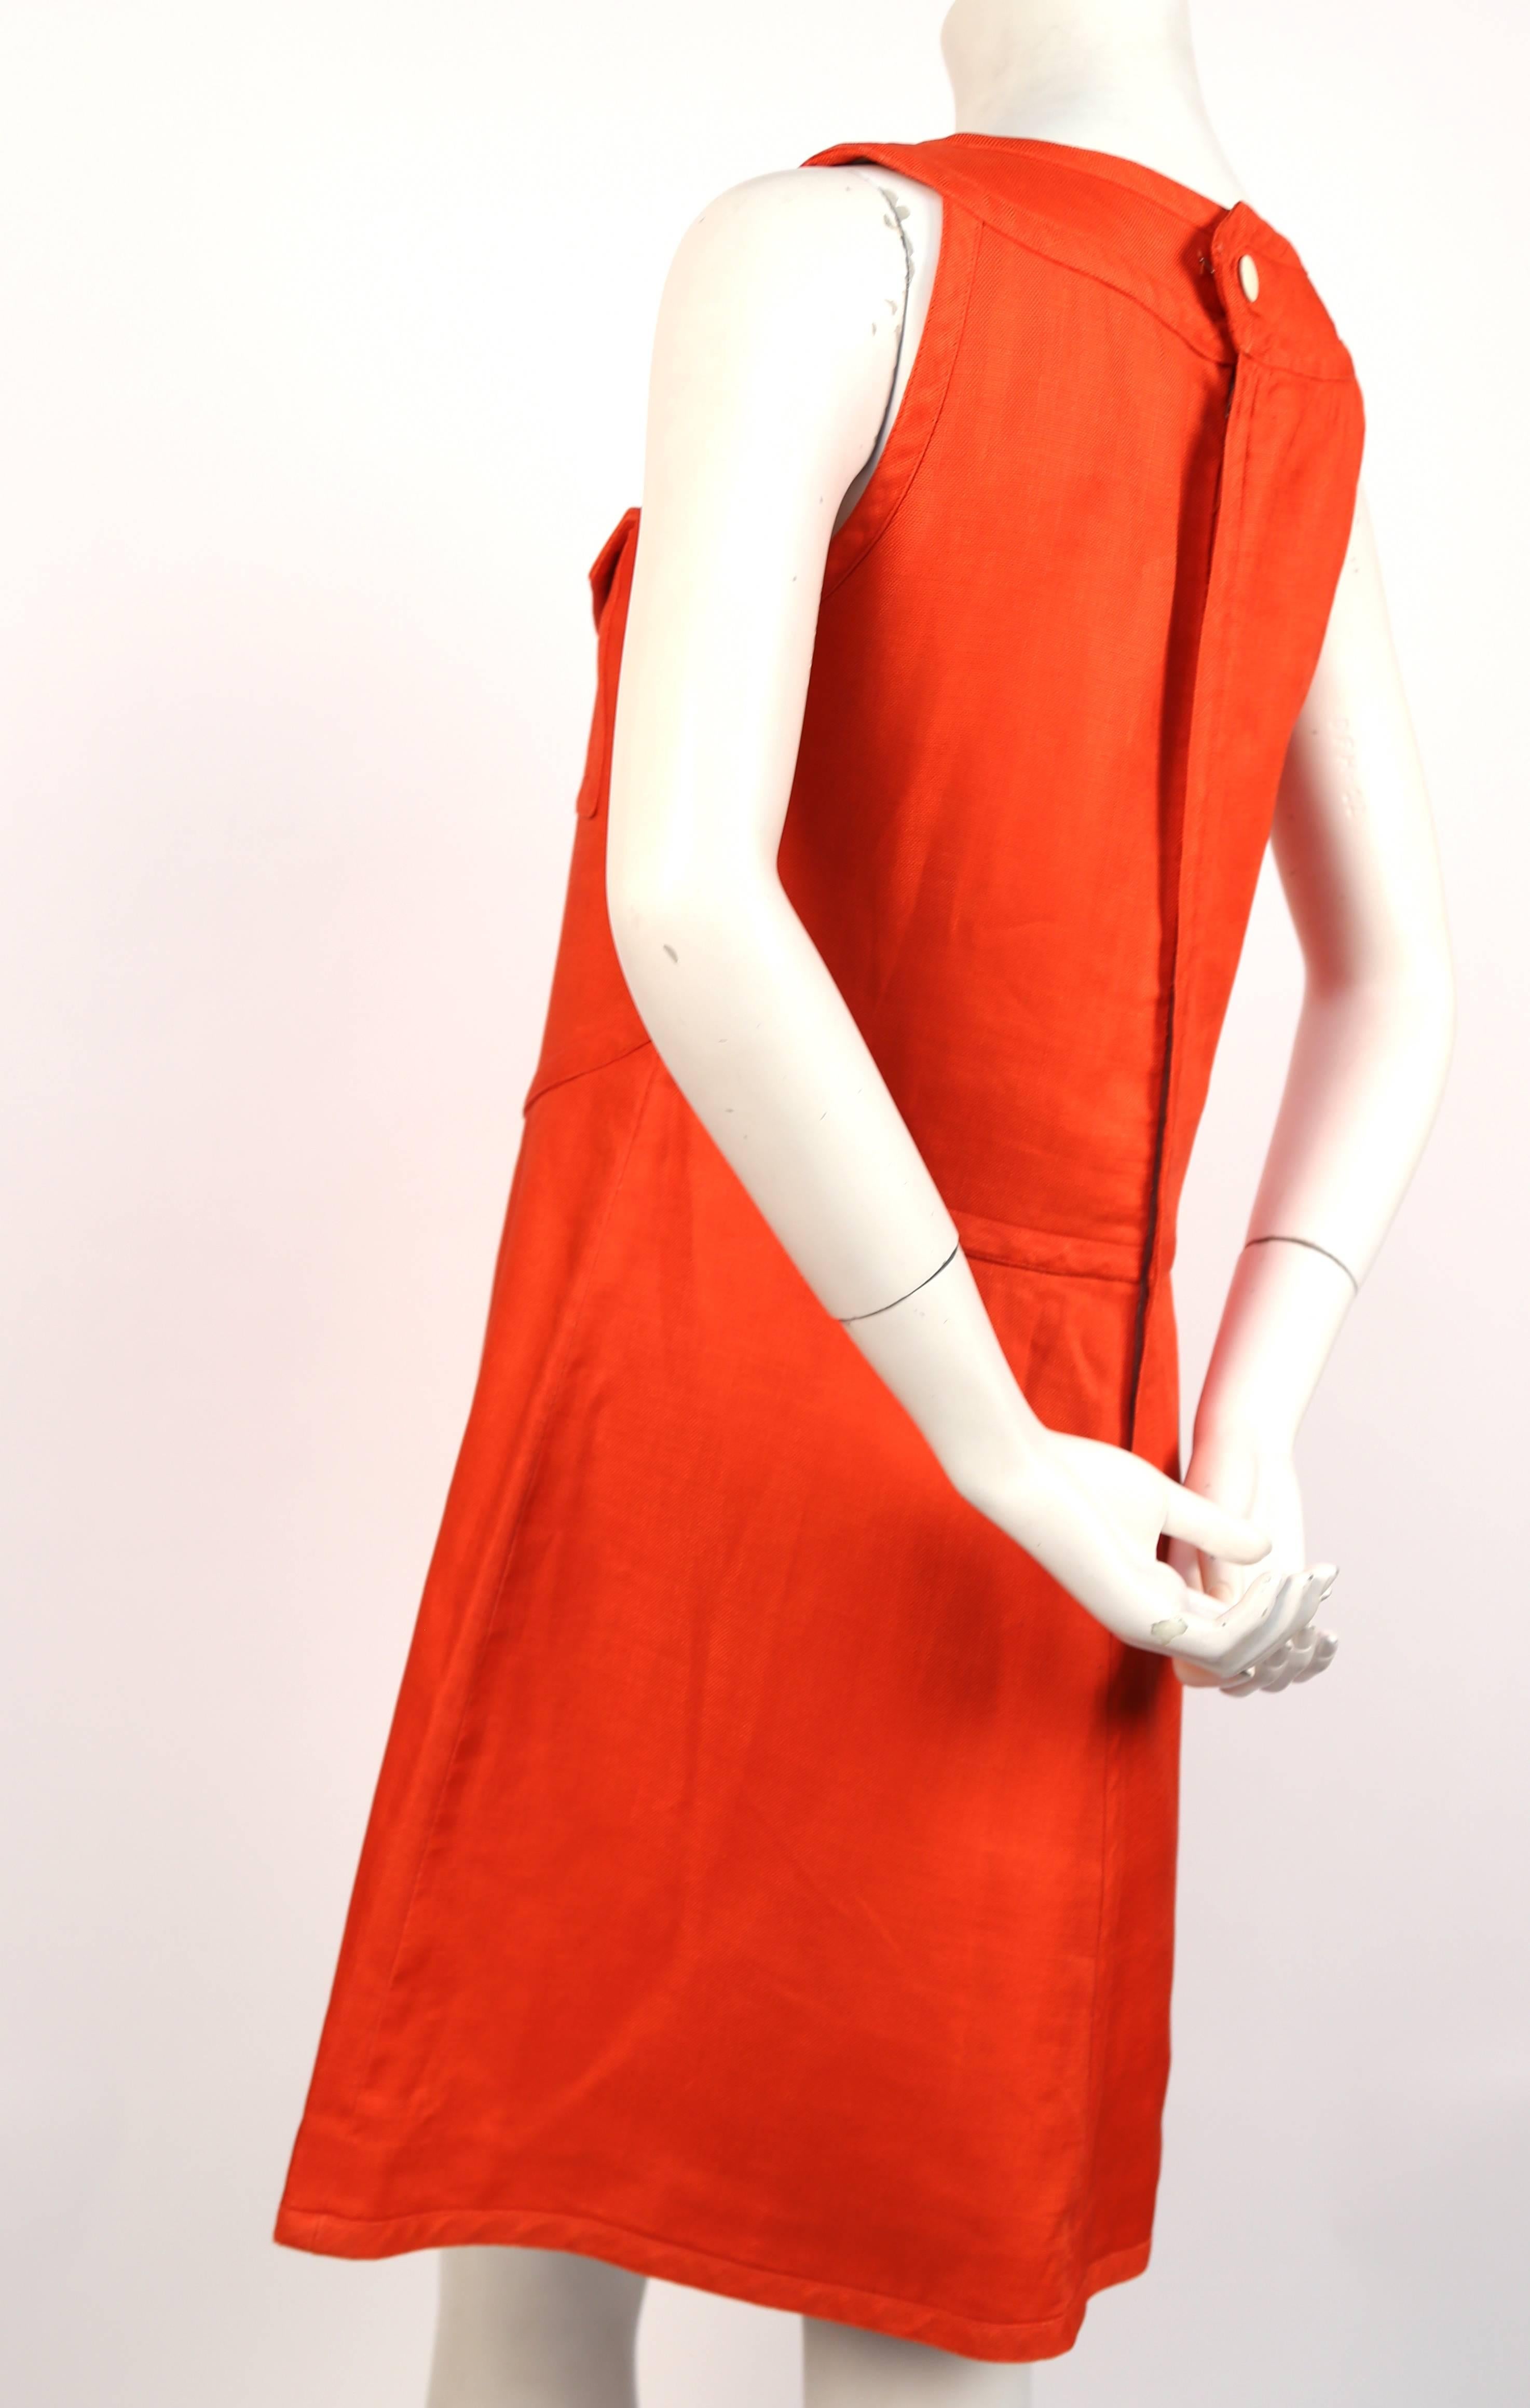 Very rare vivid tangerine linen A-line haute couture dress with patch pockets from Courreges dating to the 1960's. Numbered. Fits a size 6 or 8. Approximate measurements: bust 35-35", waist 34", hips 44" and length 35".  Made in